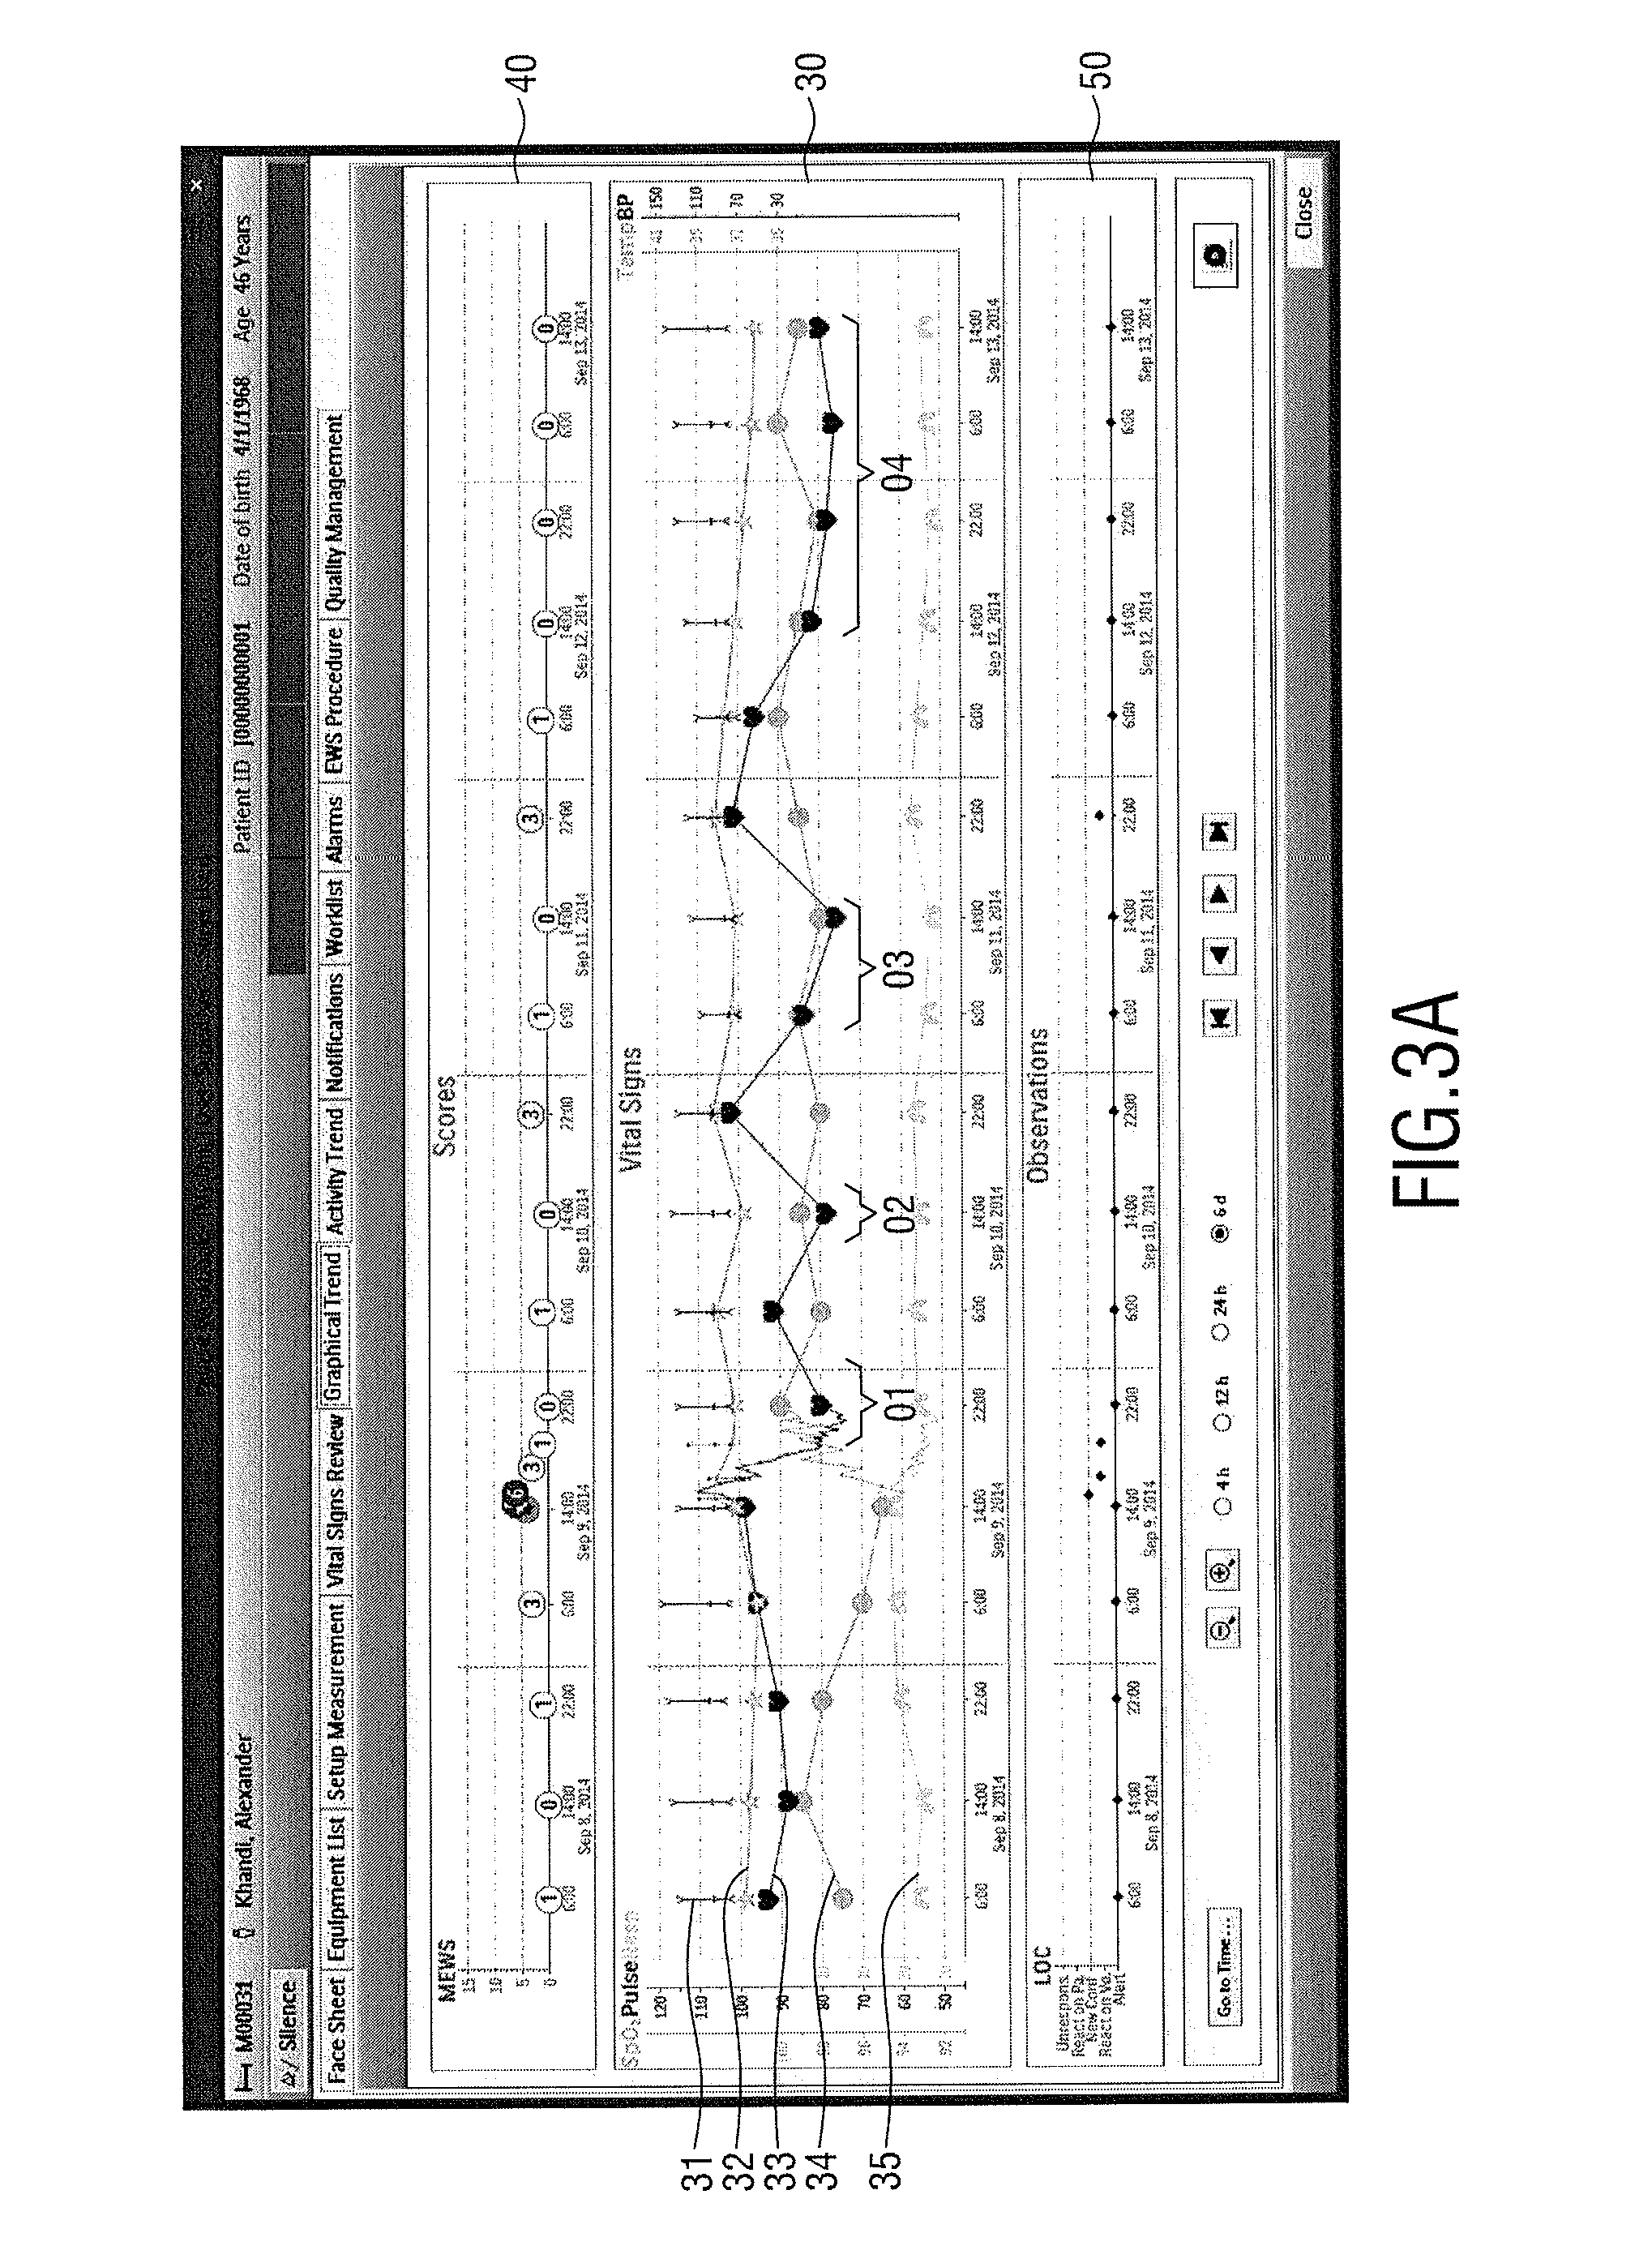 Device, system and method for visualization of patient-related data